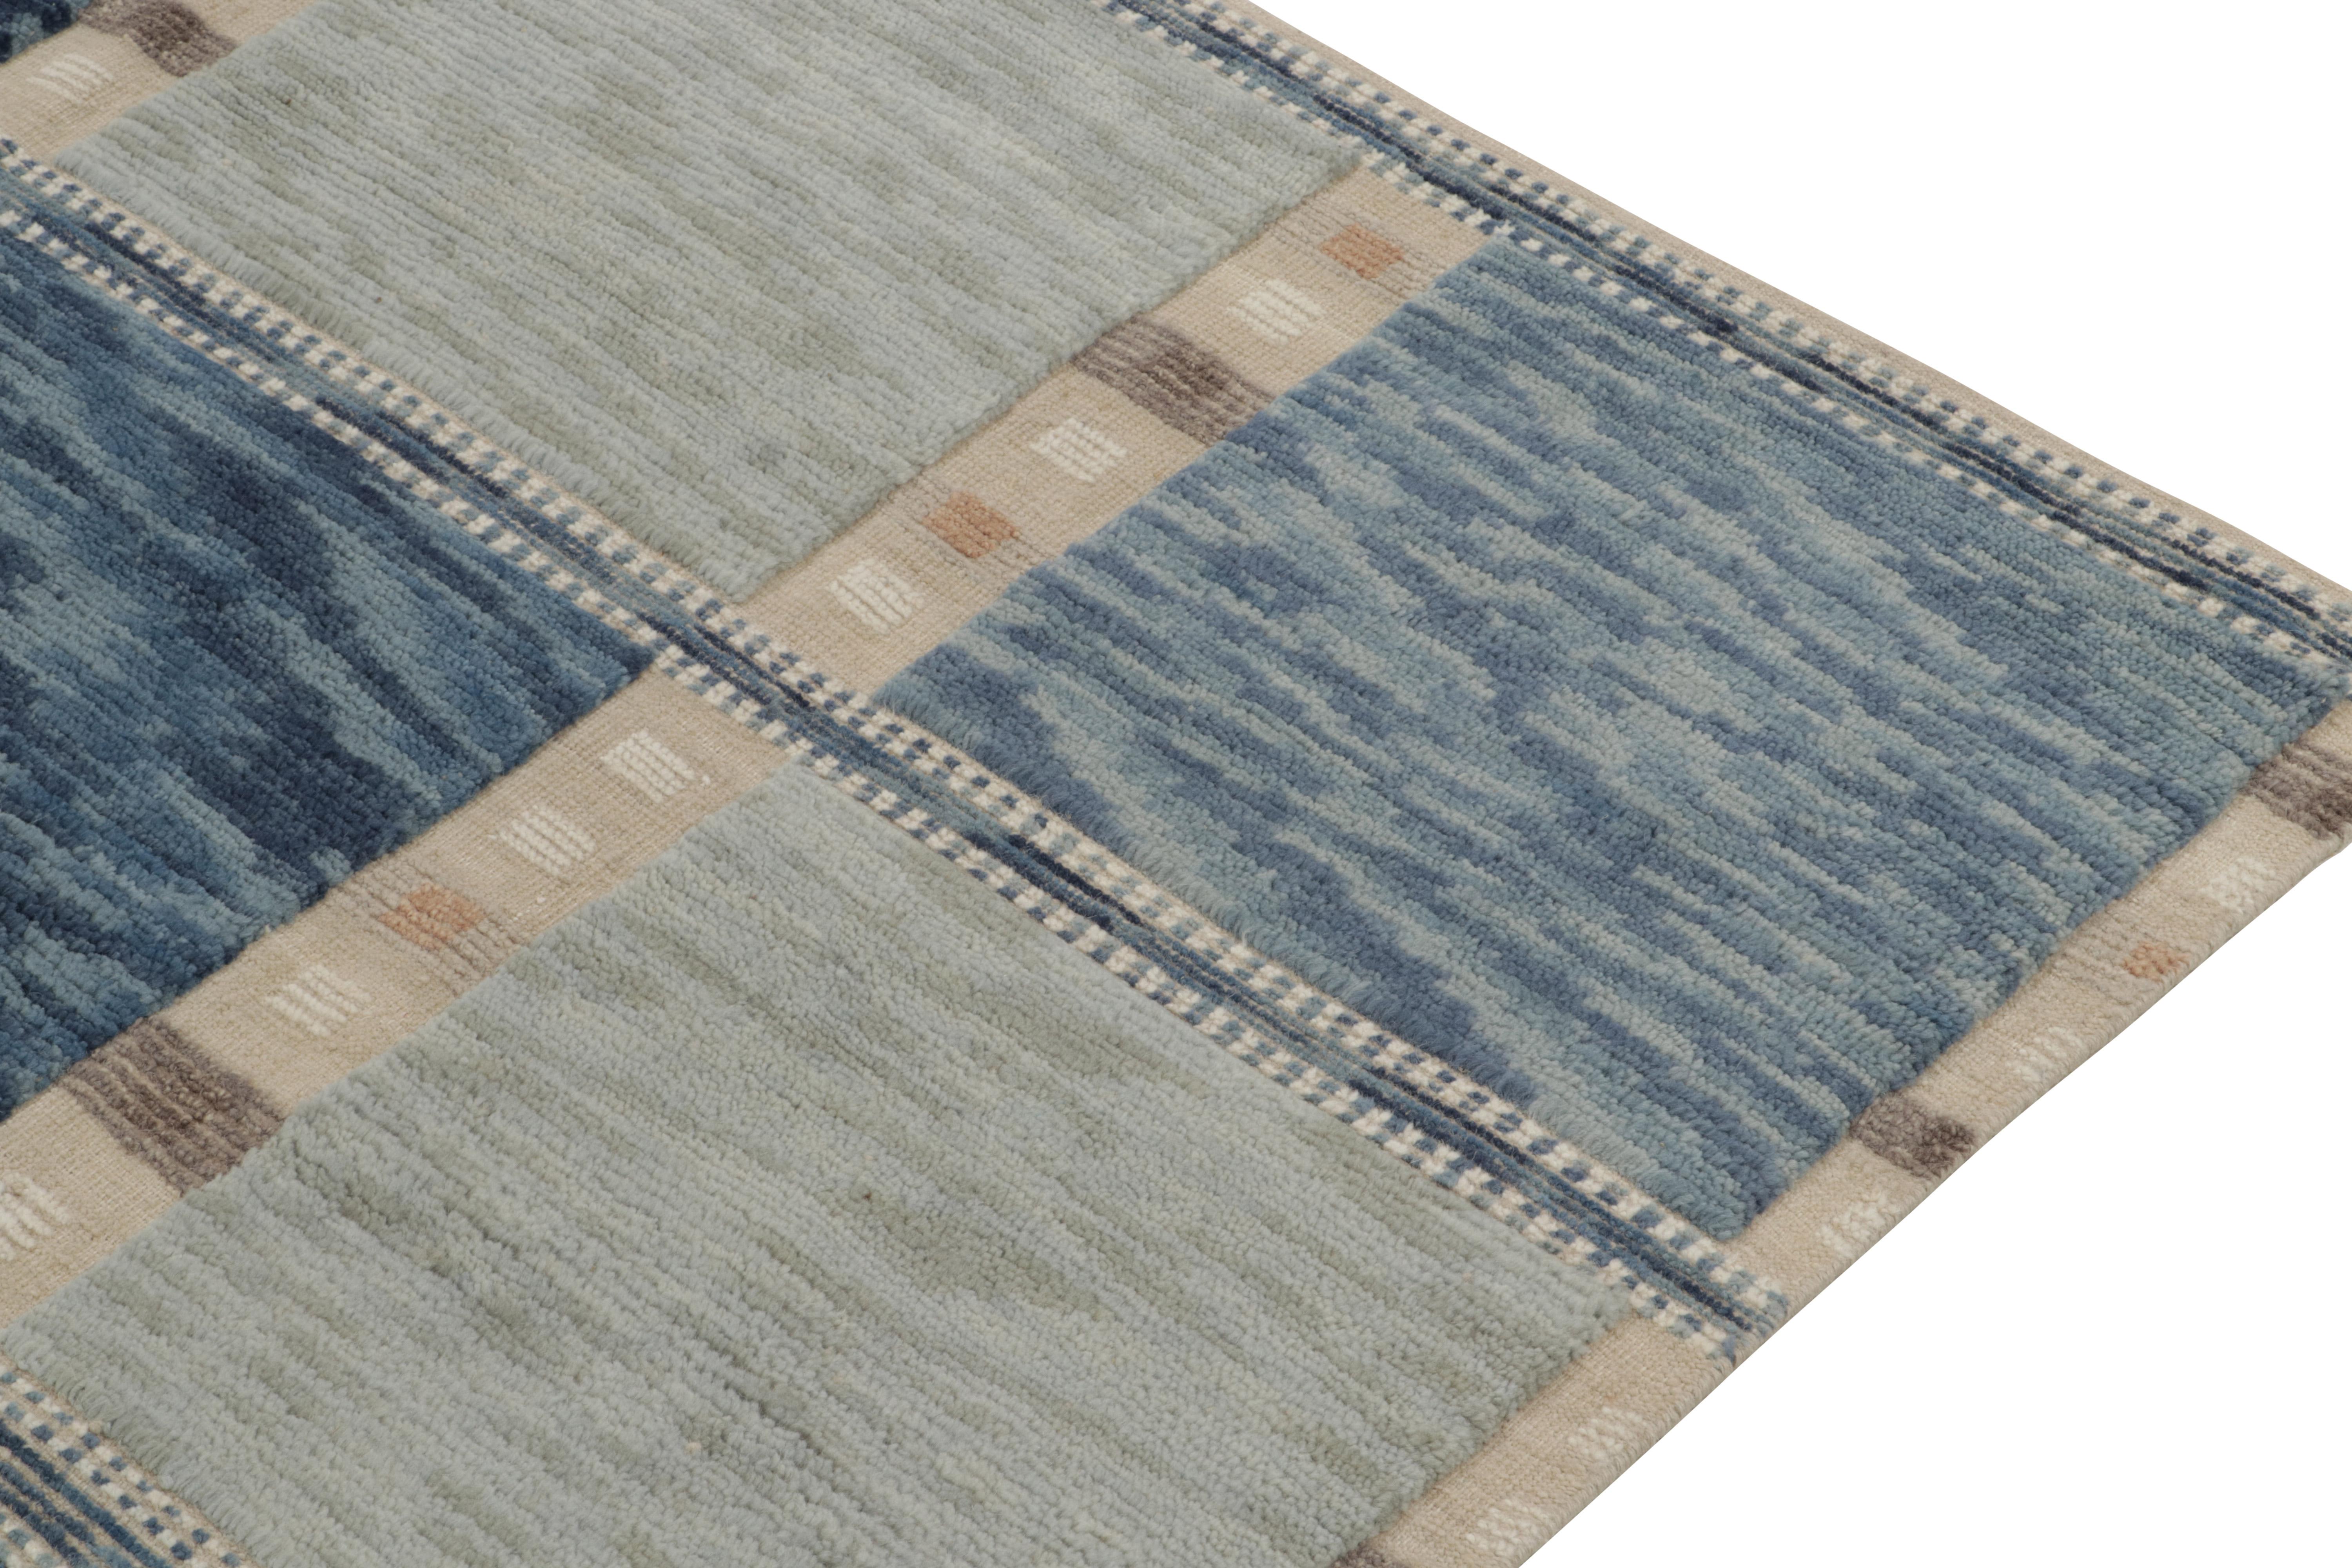 Hand-Knotted Rug & Kilim’s Scandinavian Style Rug in Blue and Beige-Brown Geometric Patterns For Sale